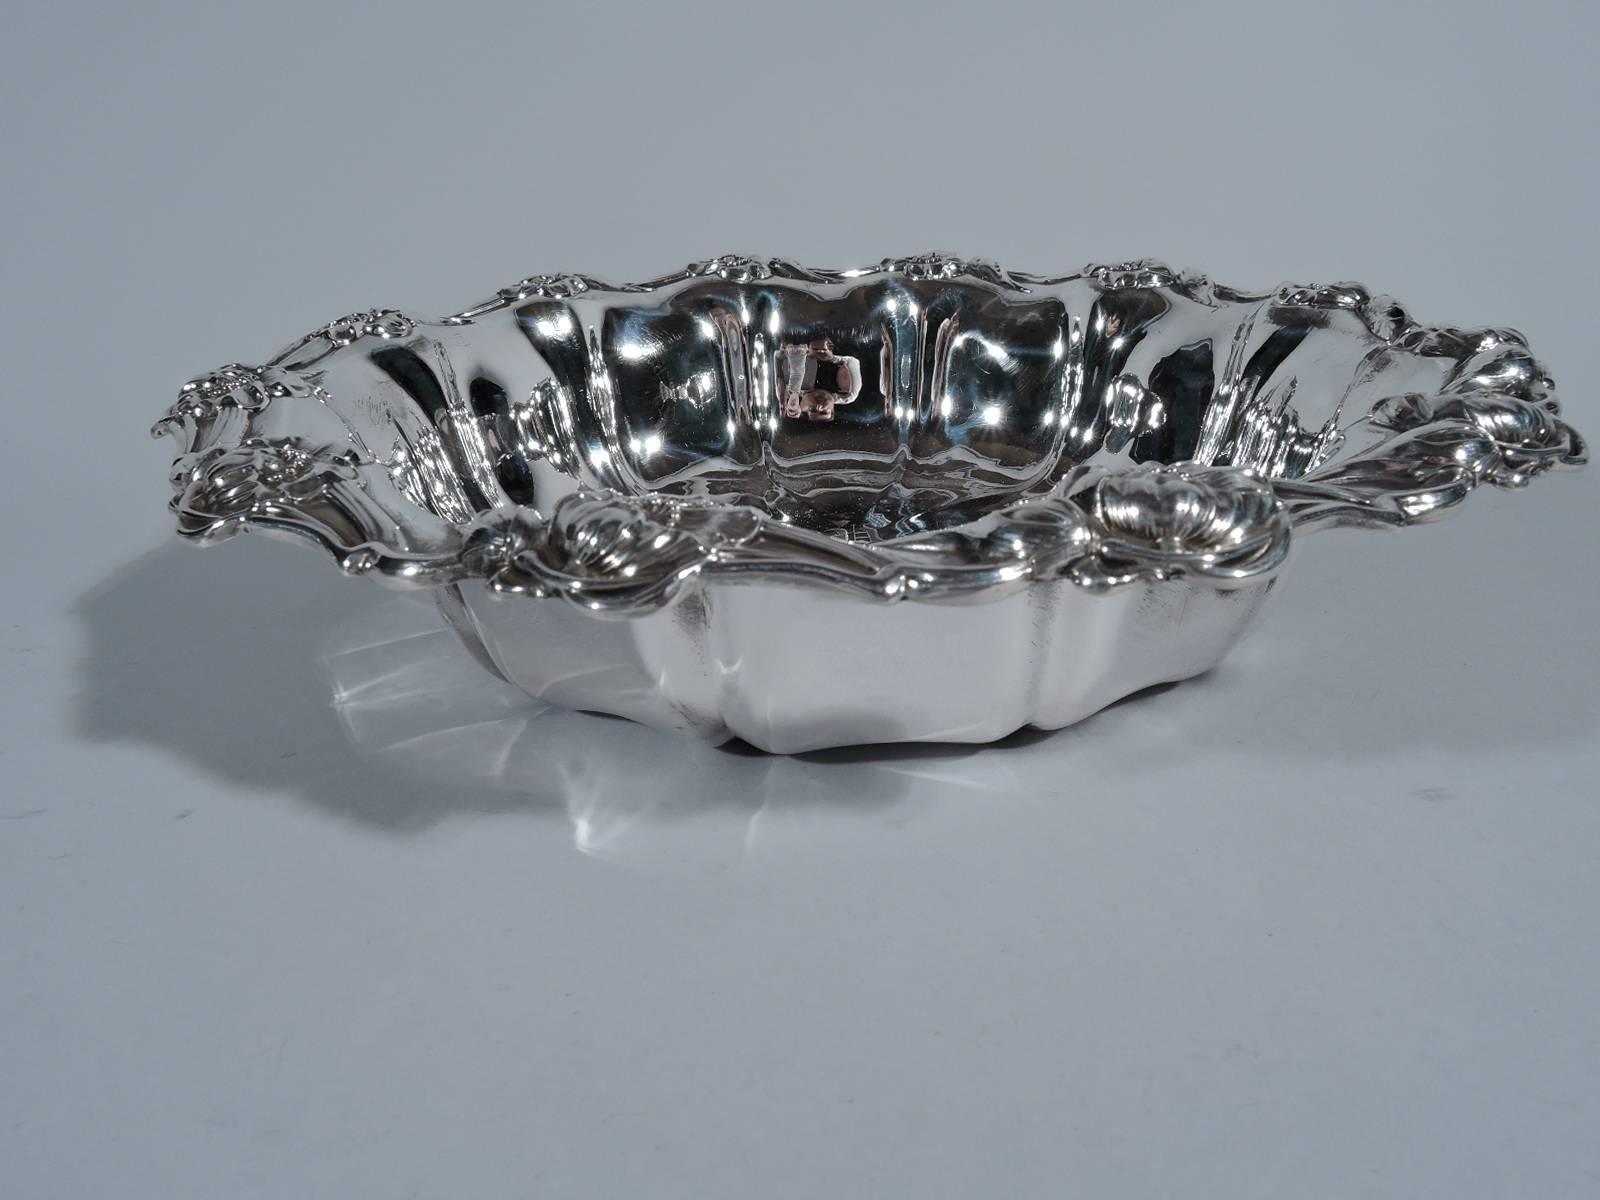 Art Nouveau sterling silver bowl. Made by Unger Brothers in Newark. Round with lobed sides. Well has raised radiating lines. Scrolled rim with tendrils, buds, and blossoms. Script monogram. A pretty piece by a collectible maker active in the late